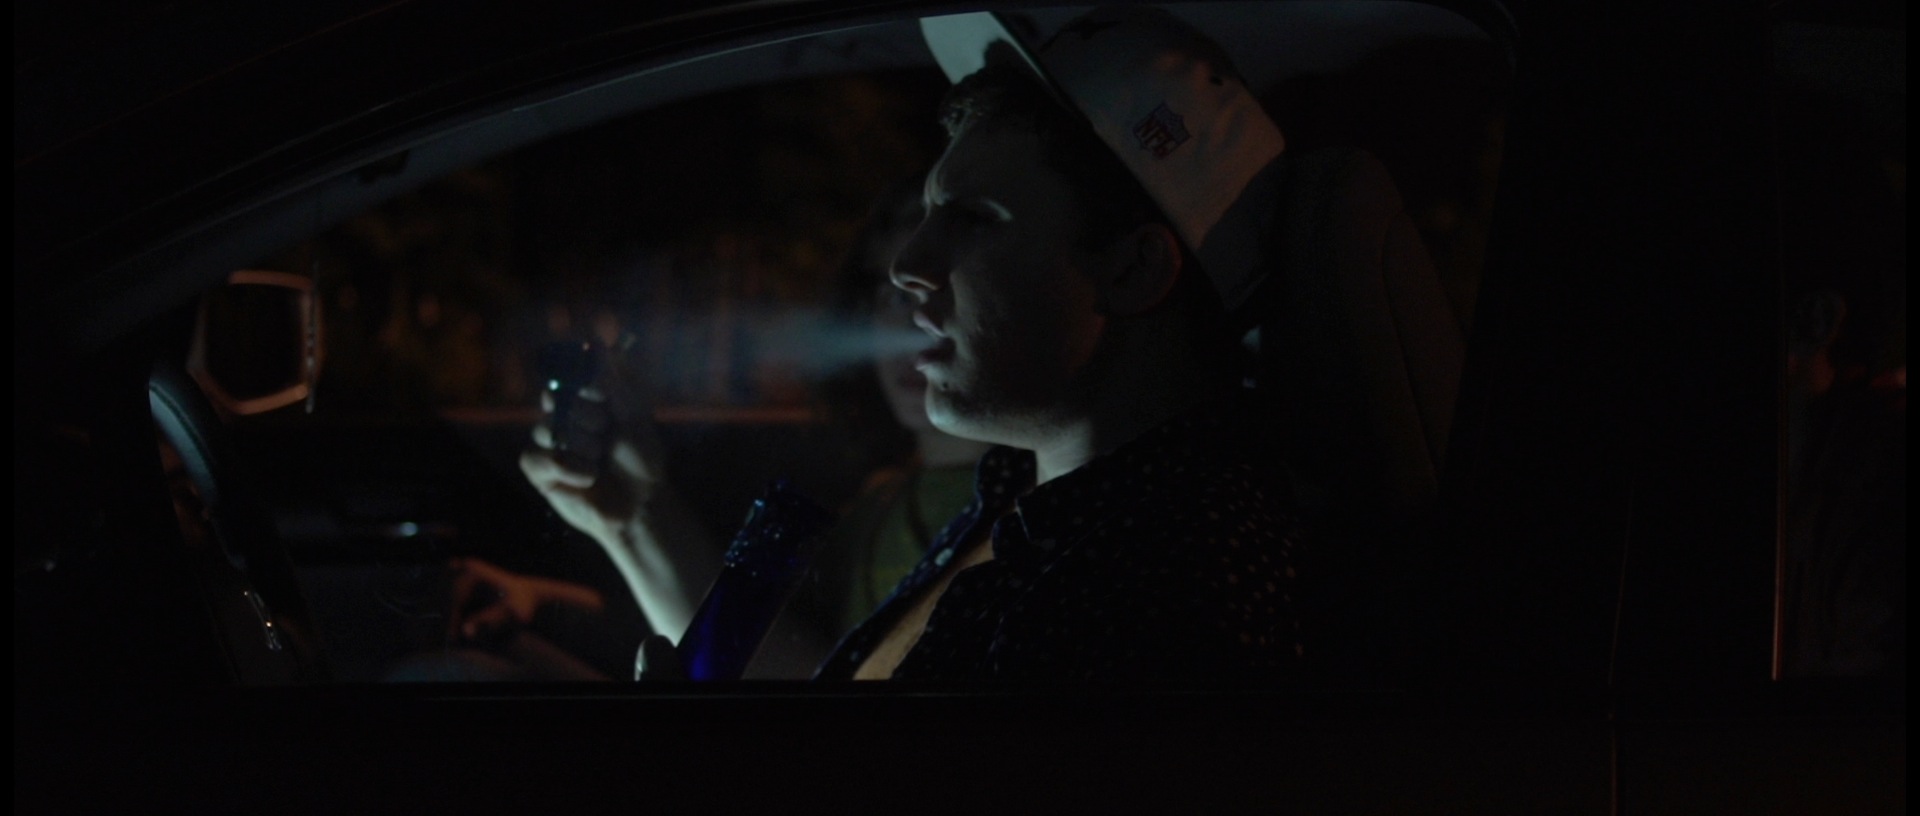  Most of the film is an extended night scene when the three main characters go out to smoke in their car. Since the scene takes a lot of twists and turns we ended&nbsp;up shooting practically 360 degrees around the vehicle. This is just one of the sh